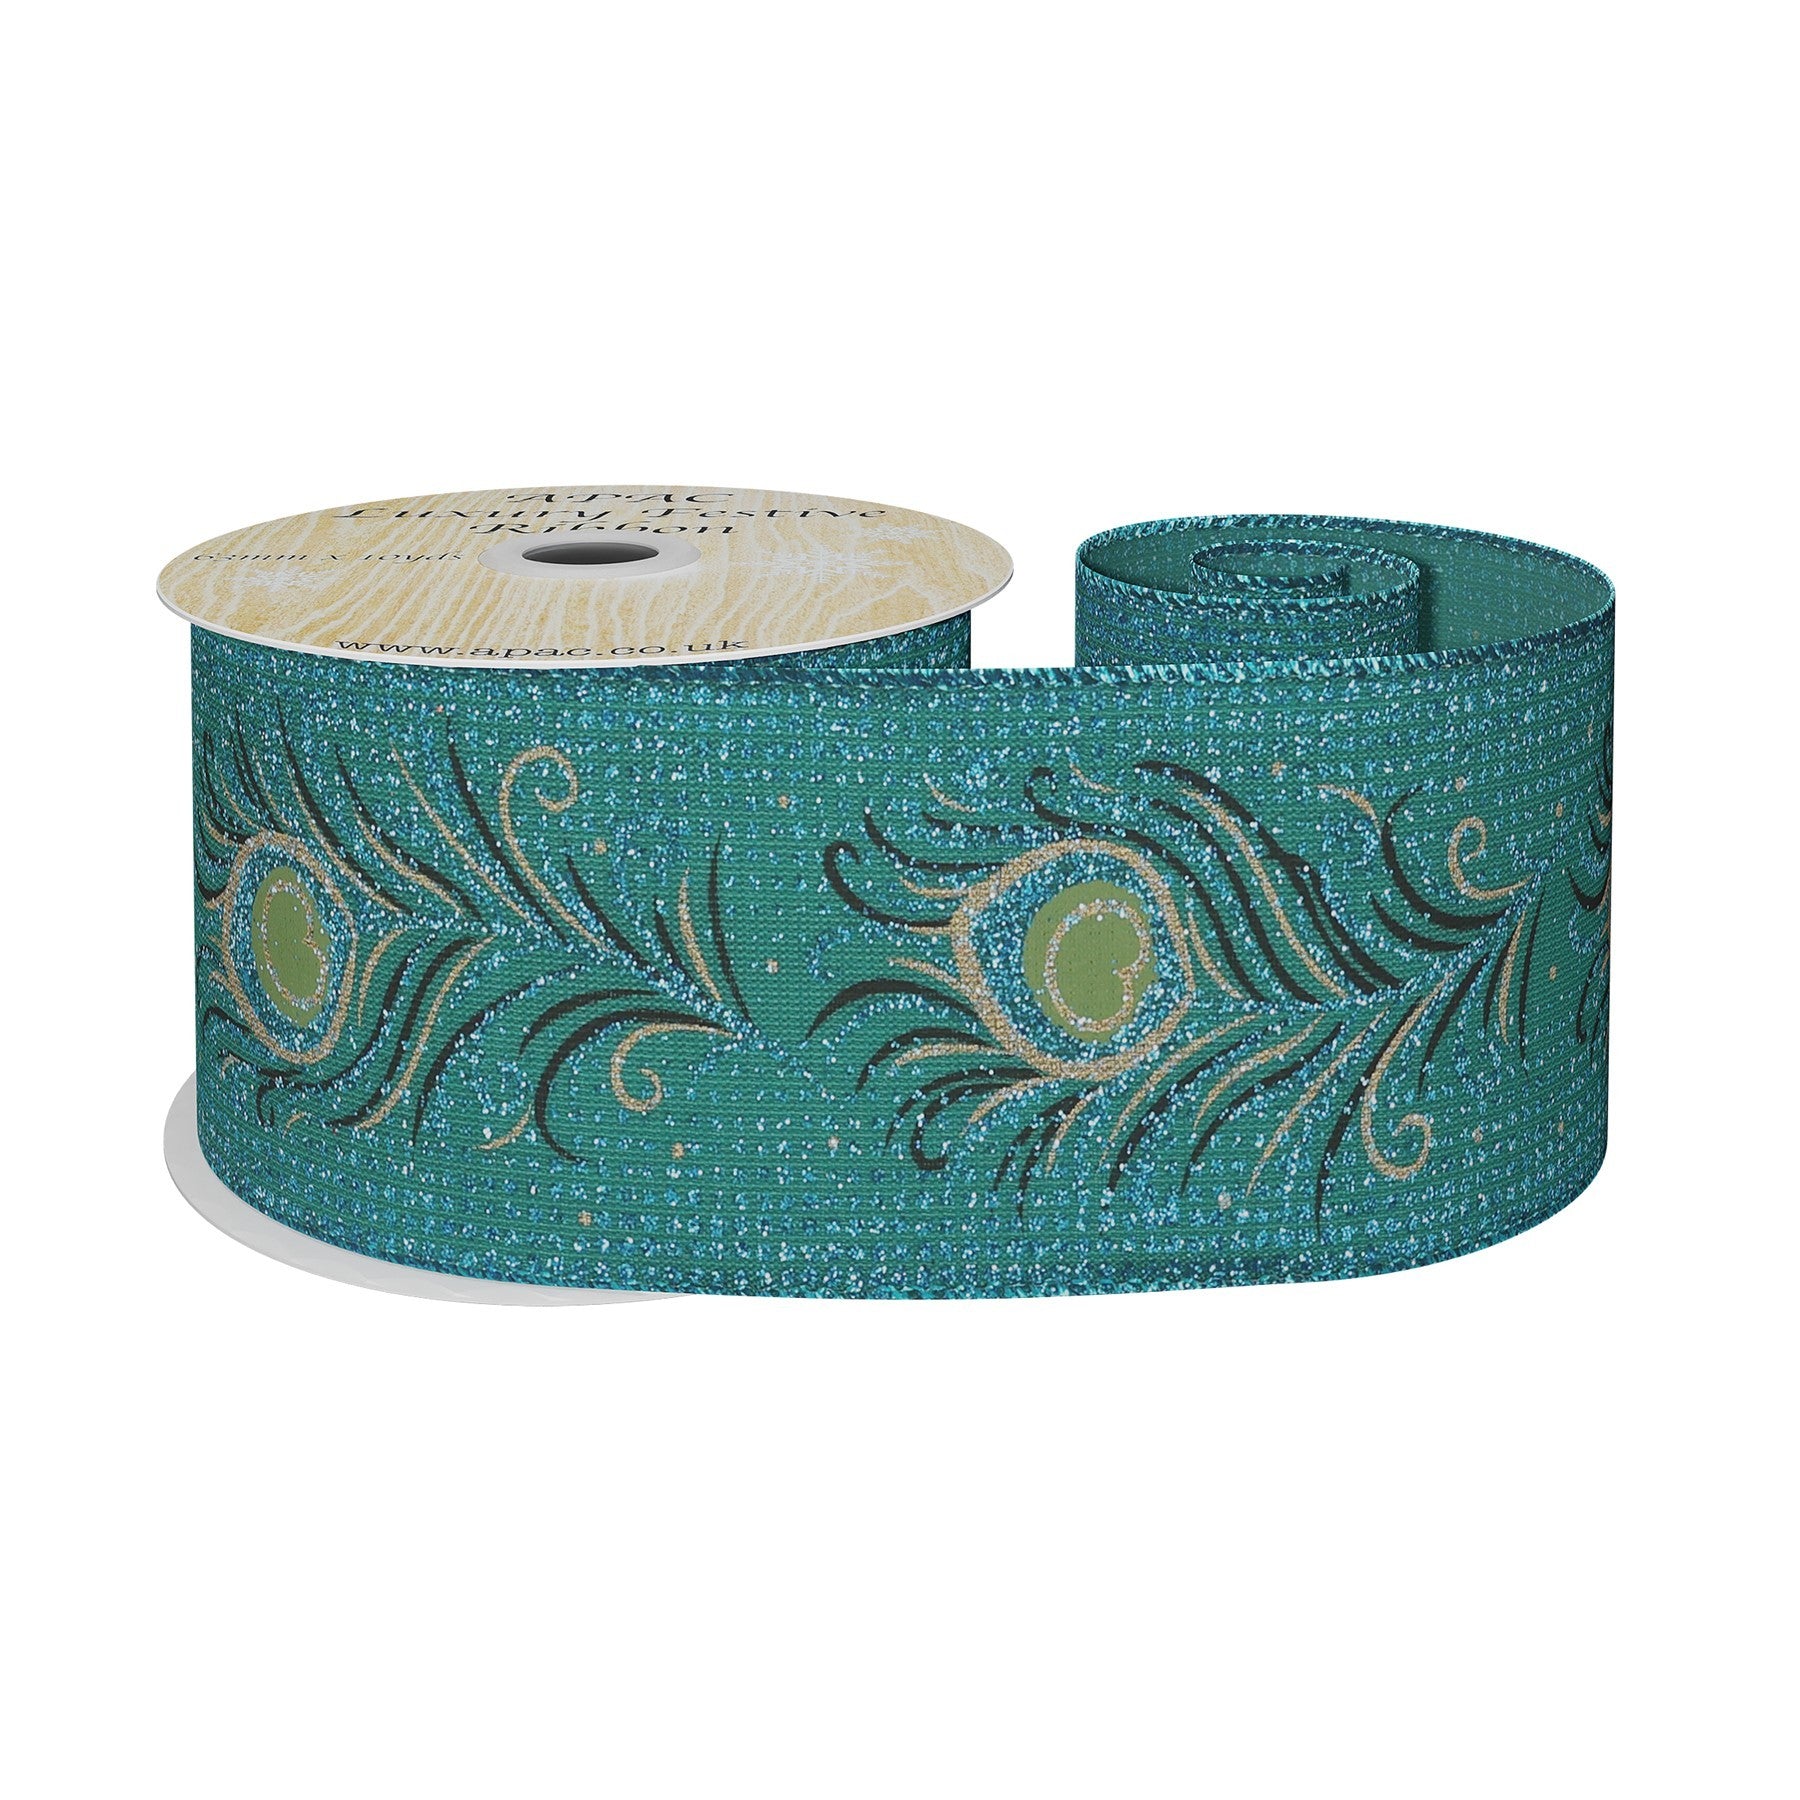 View Turquoise peacock ribbon 63mm x 10yd information